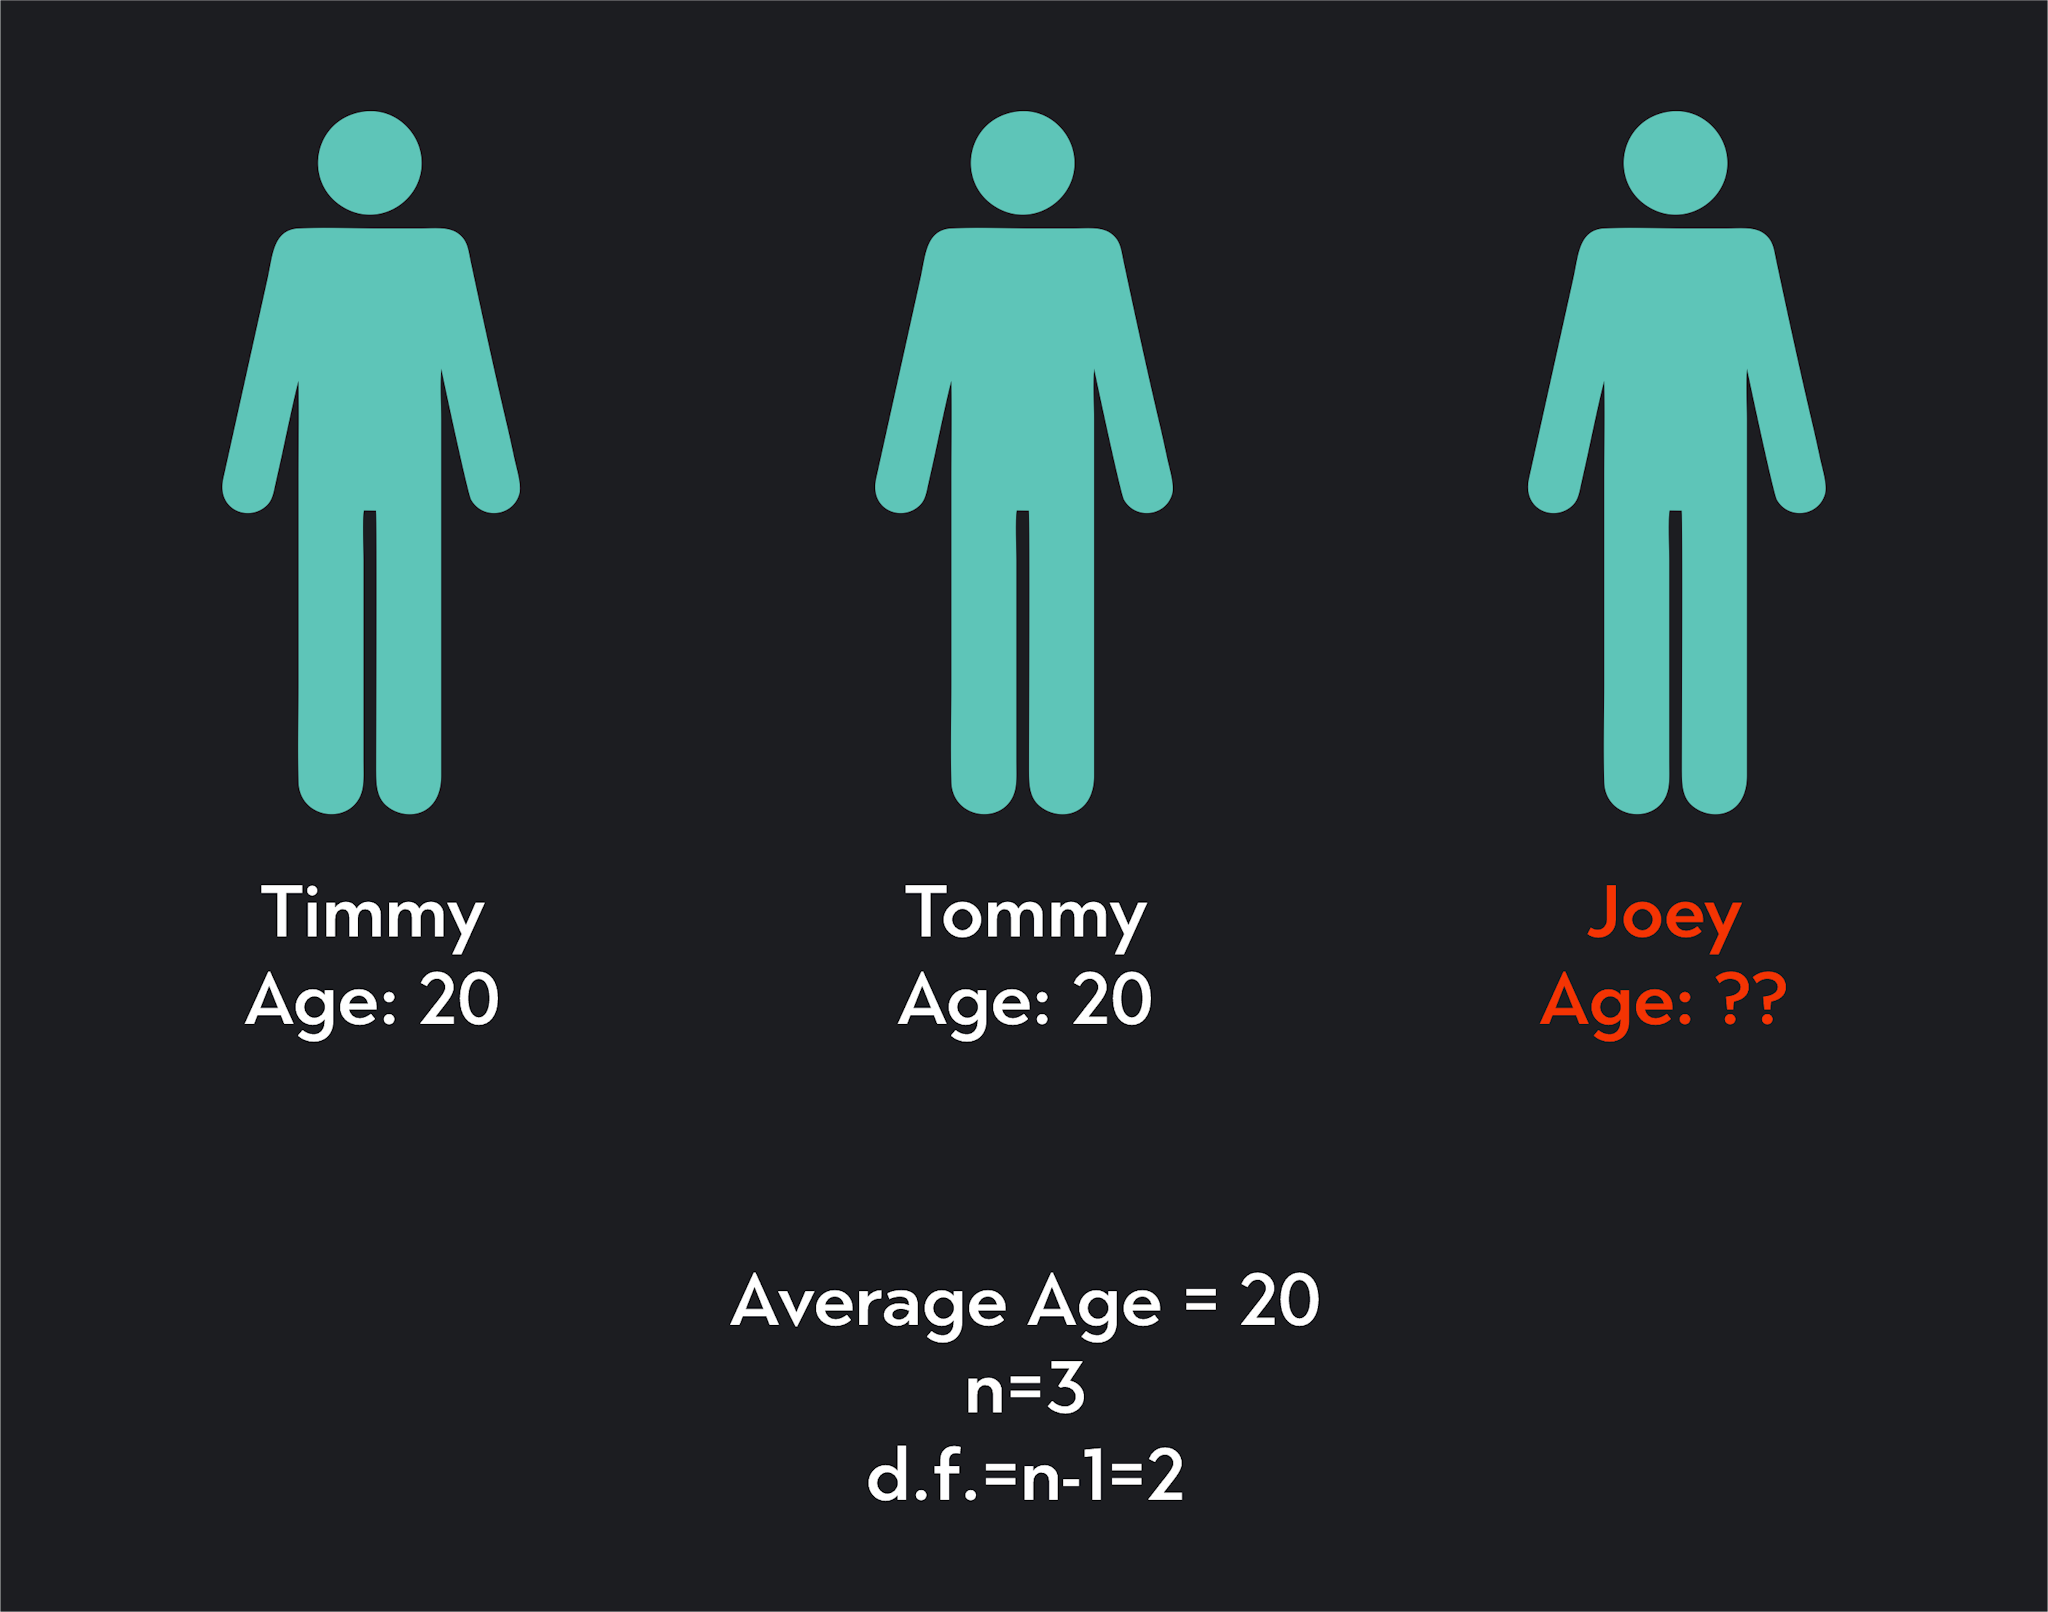 graphic showing sample data for 3 people